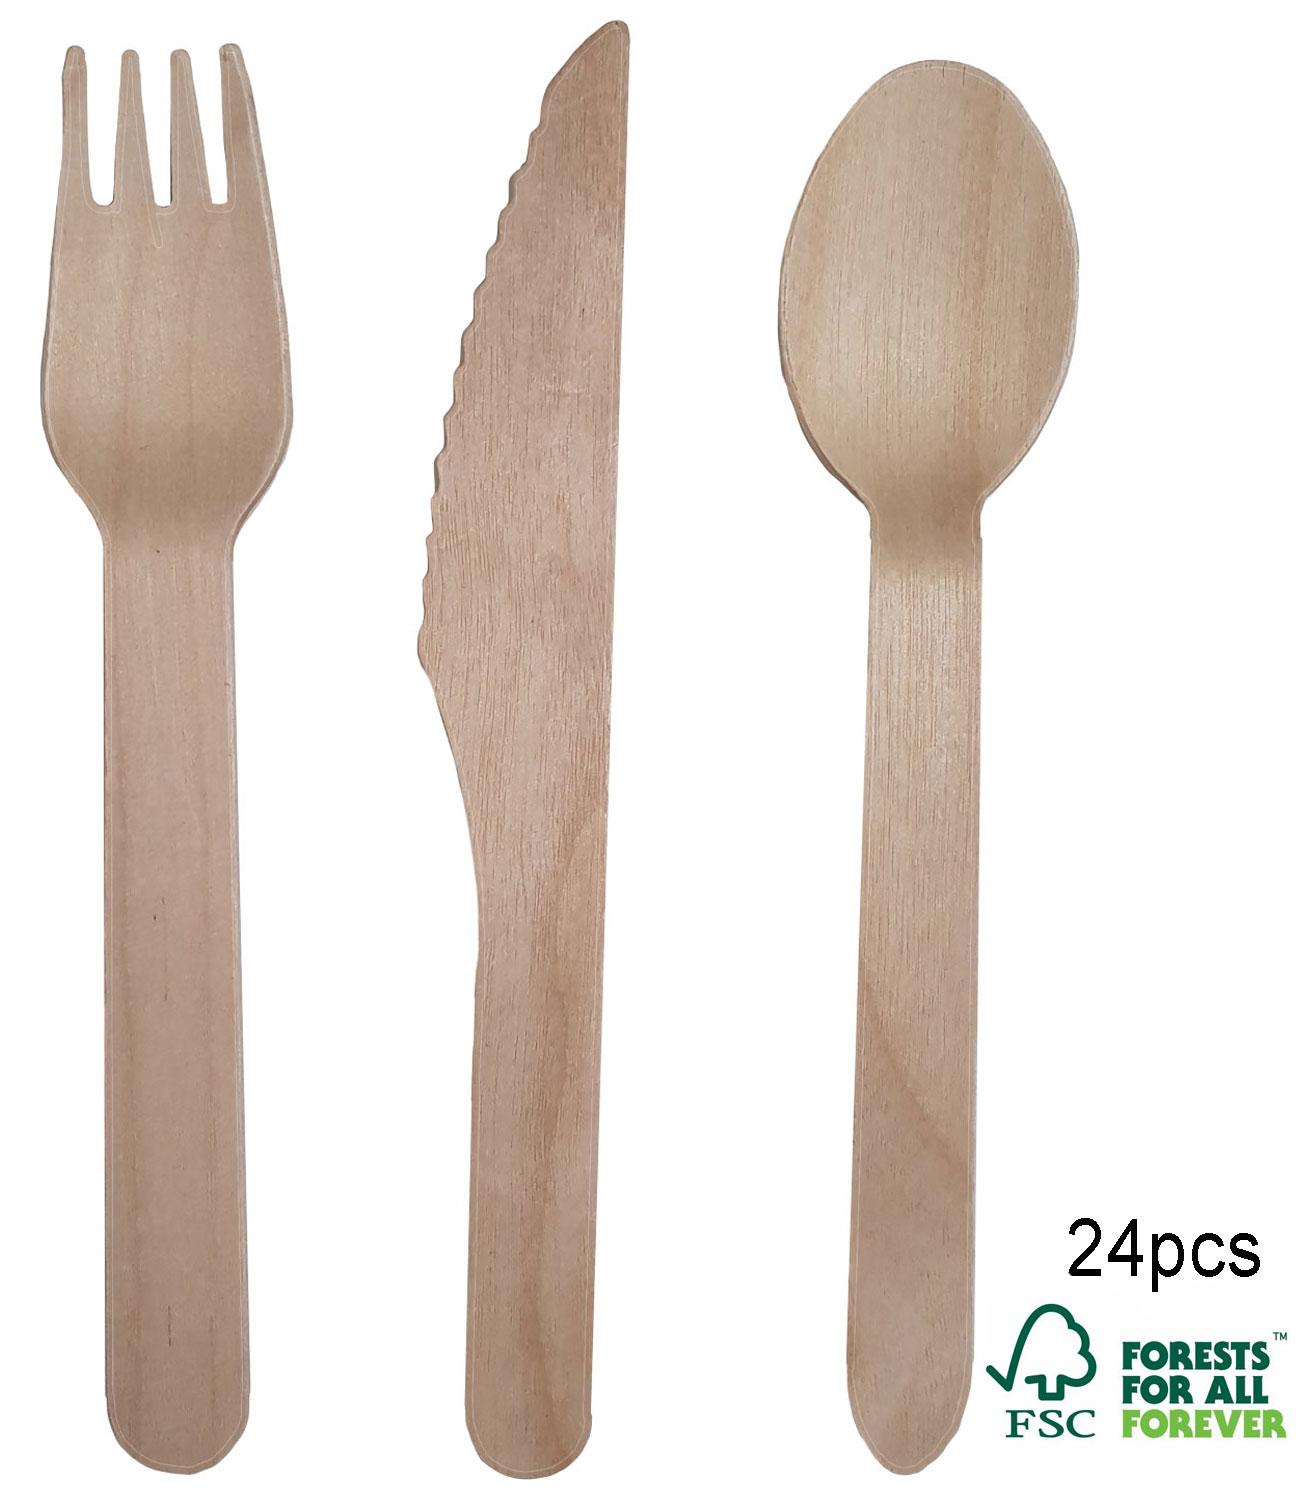 Always Sunny FSC 16cm Wooden Cutlery 24pcs. 8 ea knives, forks and wooden spoons by Amscan 9906878 available here at Karnival Costumes online party shop